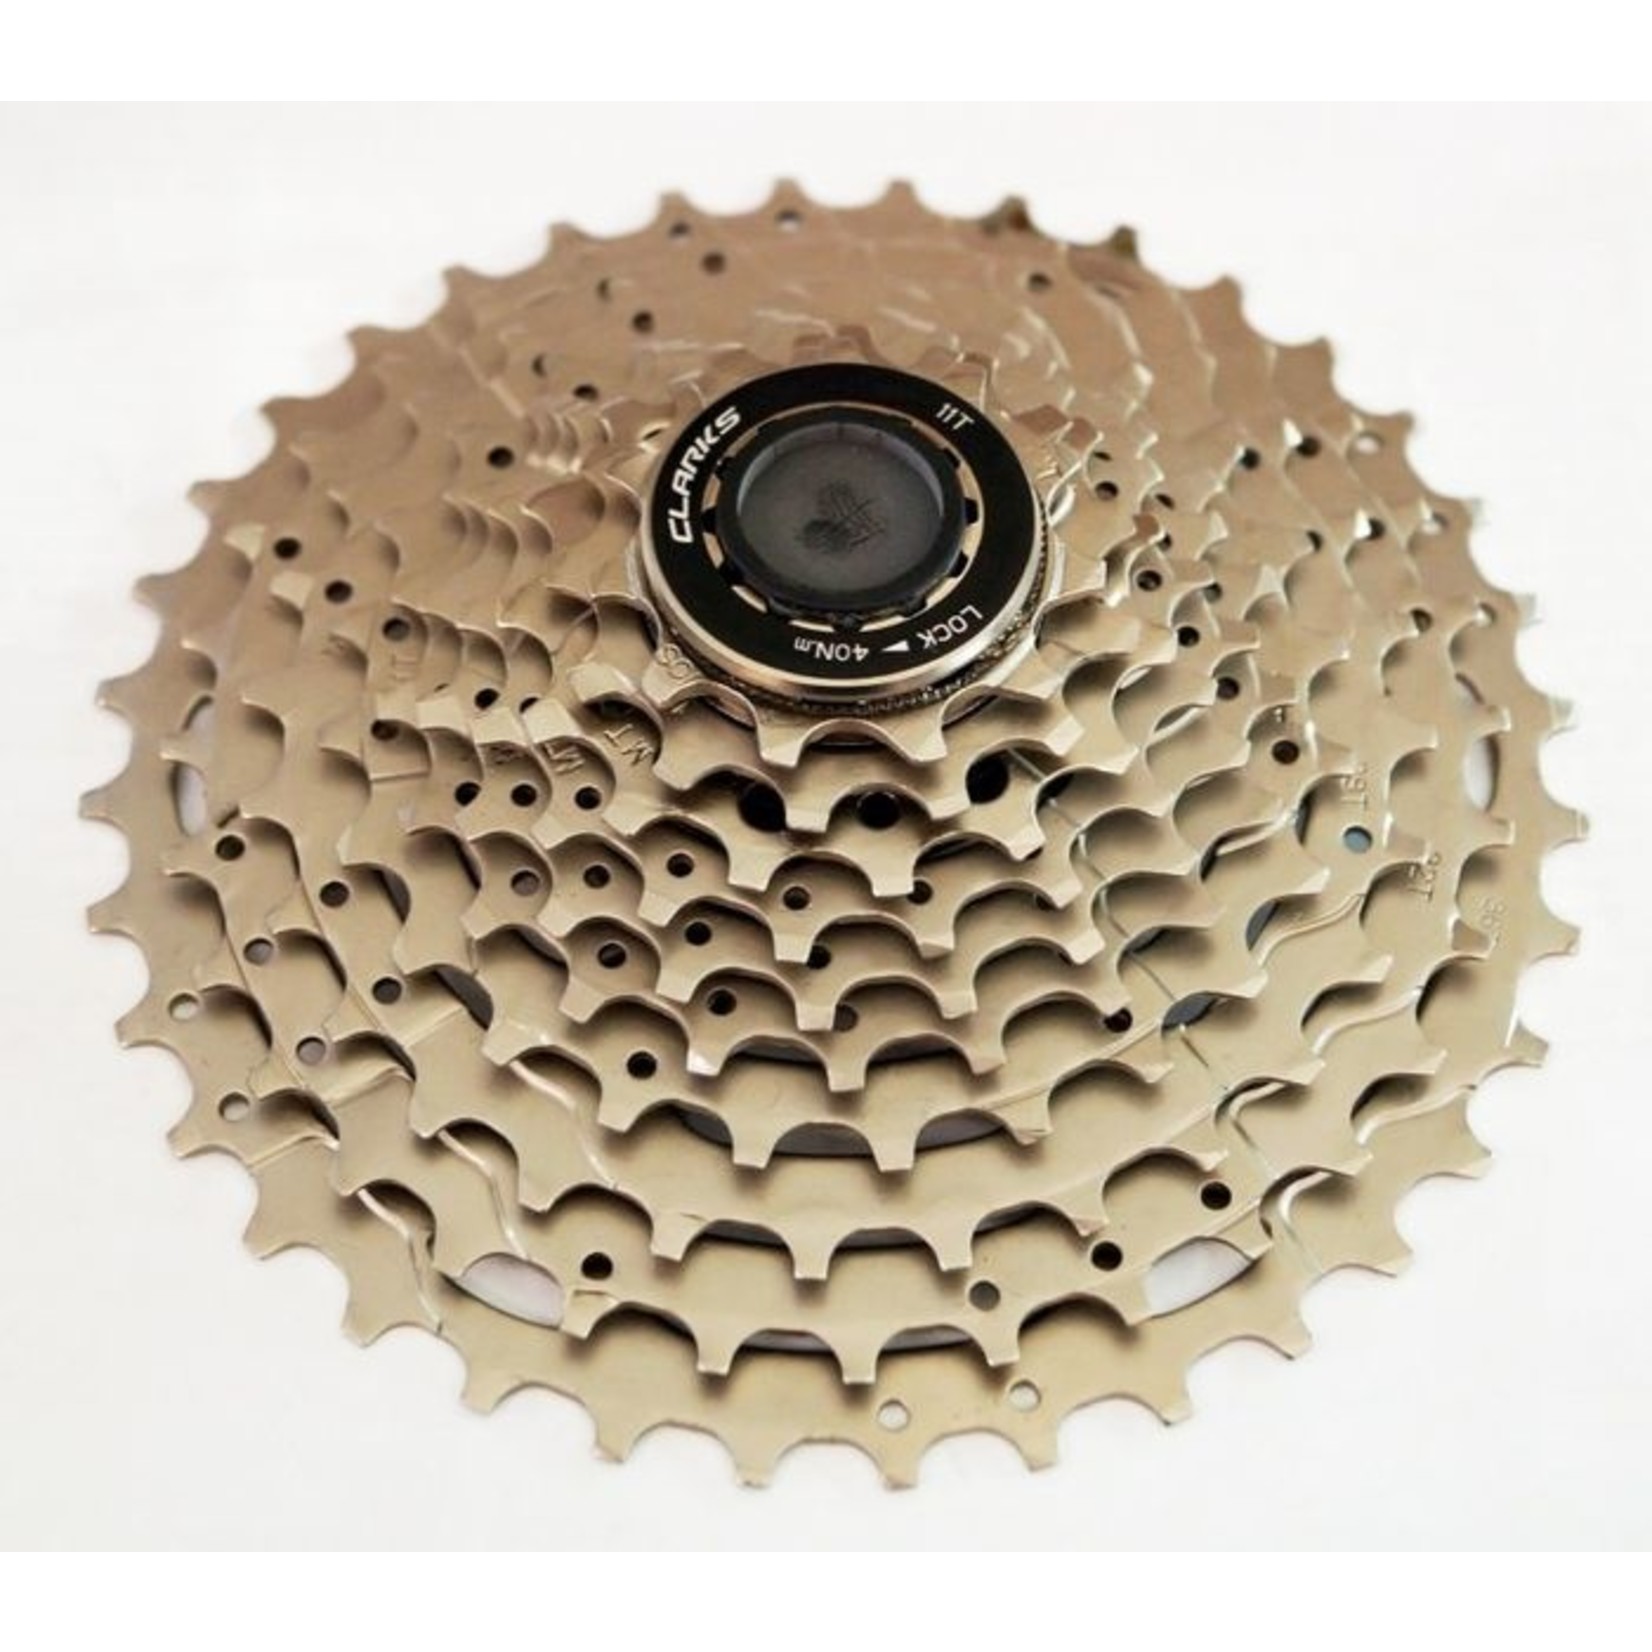 Sunrace Sunrace Cassette - 10 Speed - 11-36T - Shimano/Sram Compatible, Clarks Quality Product